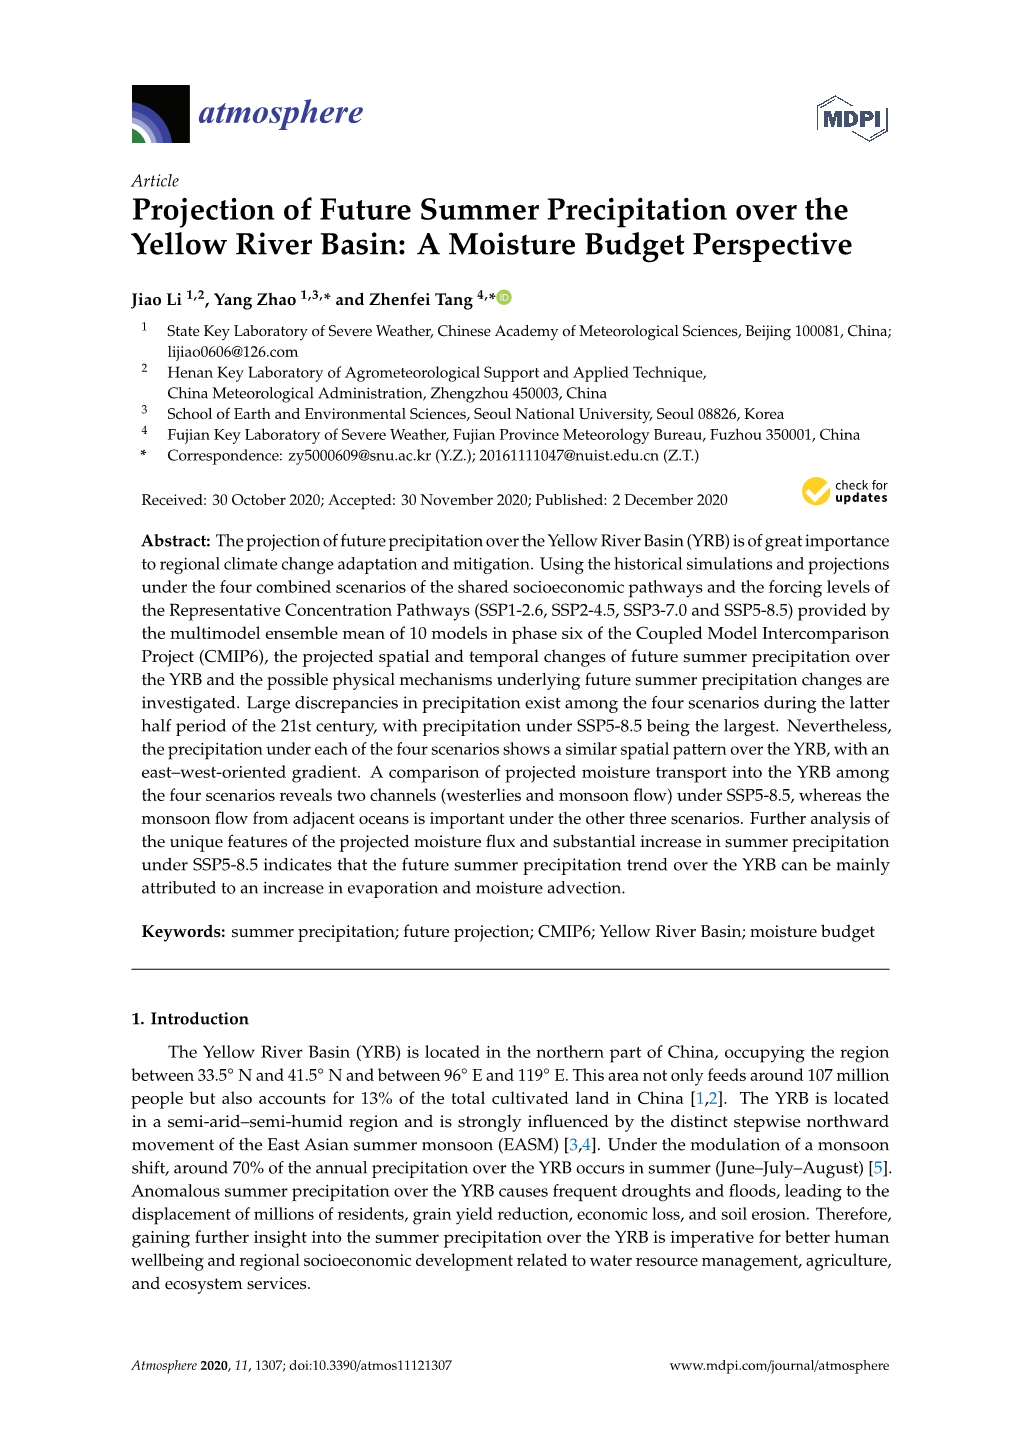 Projection of Future Summer Precipitation Over the Yellow River Basin: a Moisture Budget Perspective